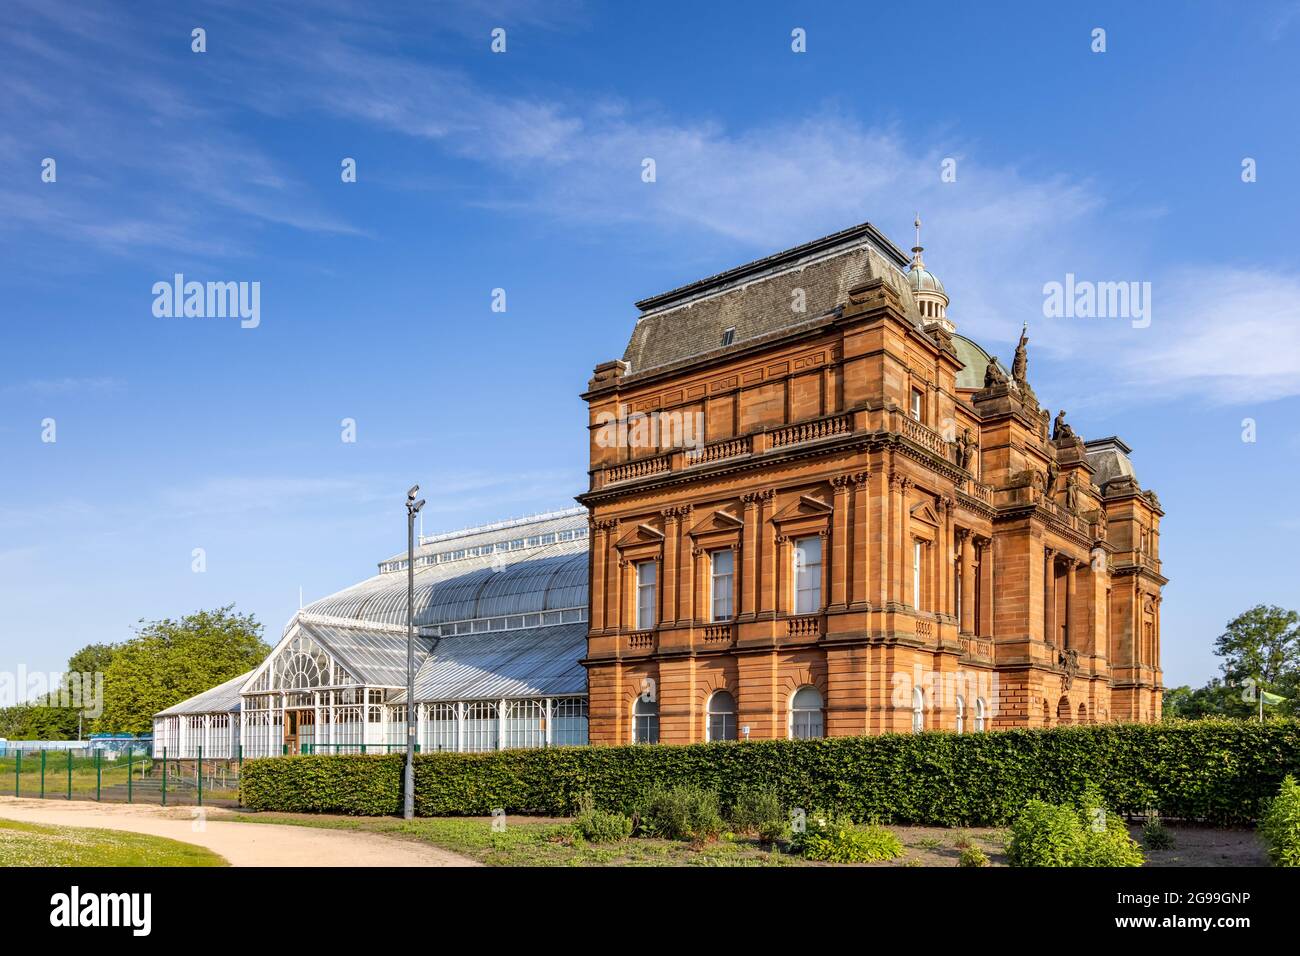 The People’s Palace is a social history museum set in historic Glasgow Green in Scotland, Uk Stock Photo